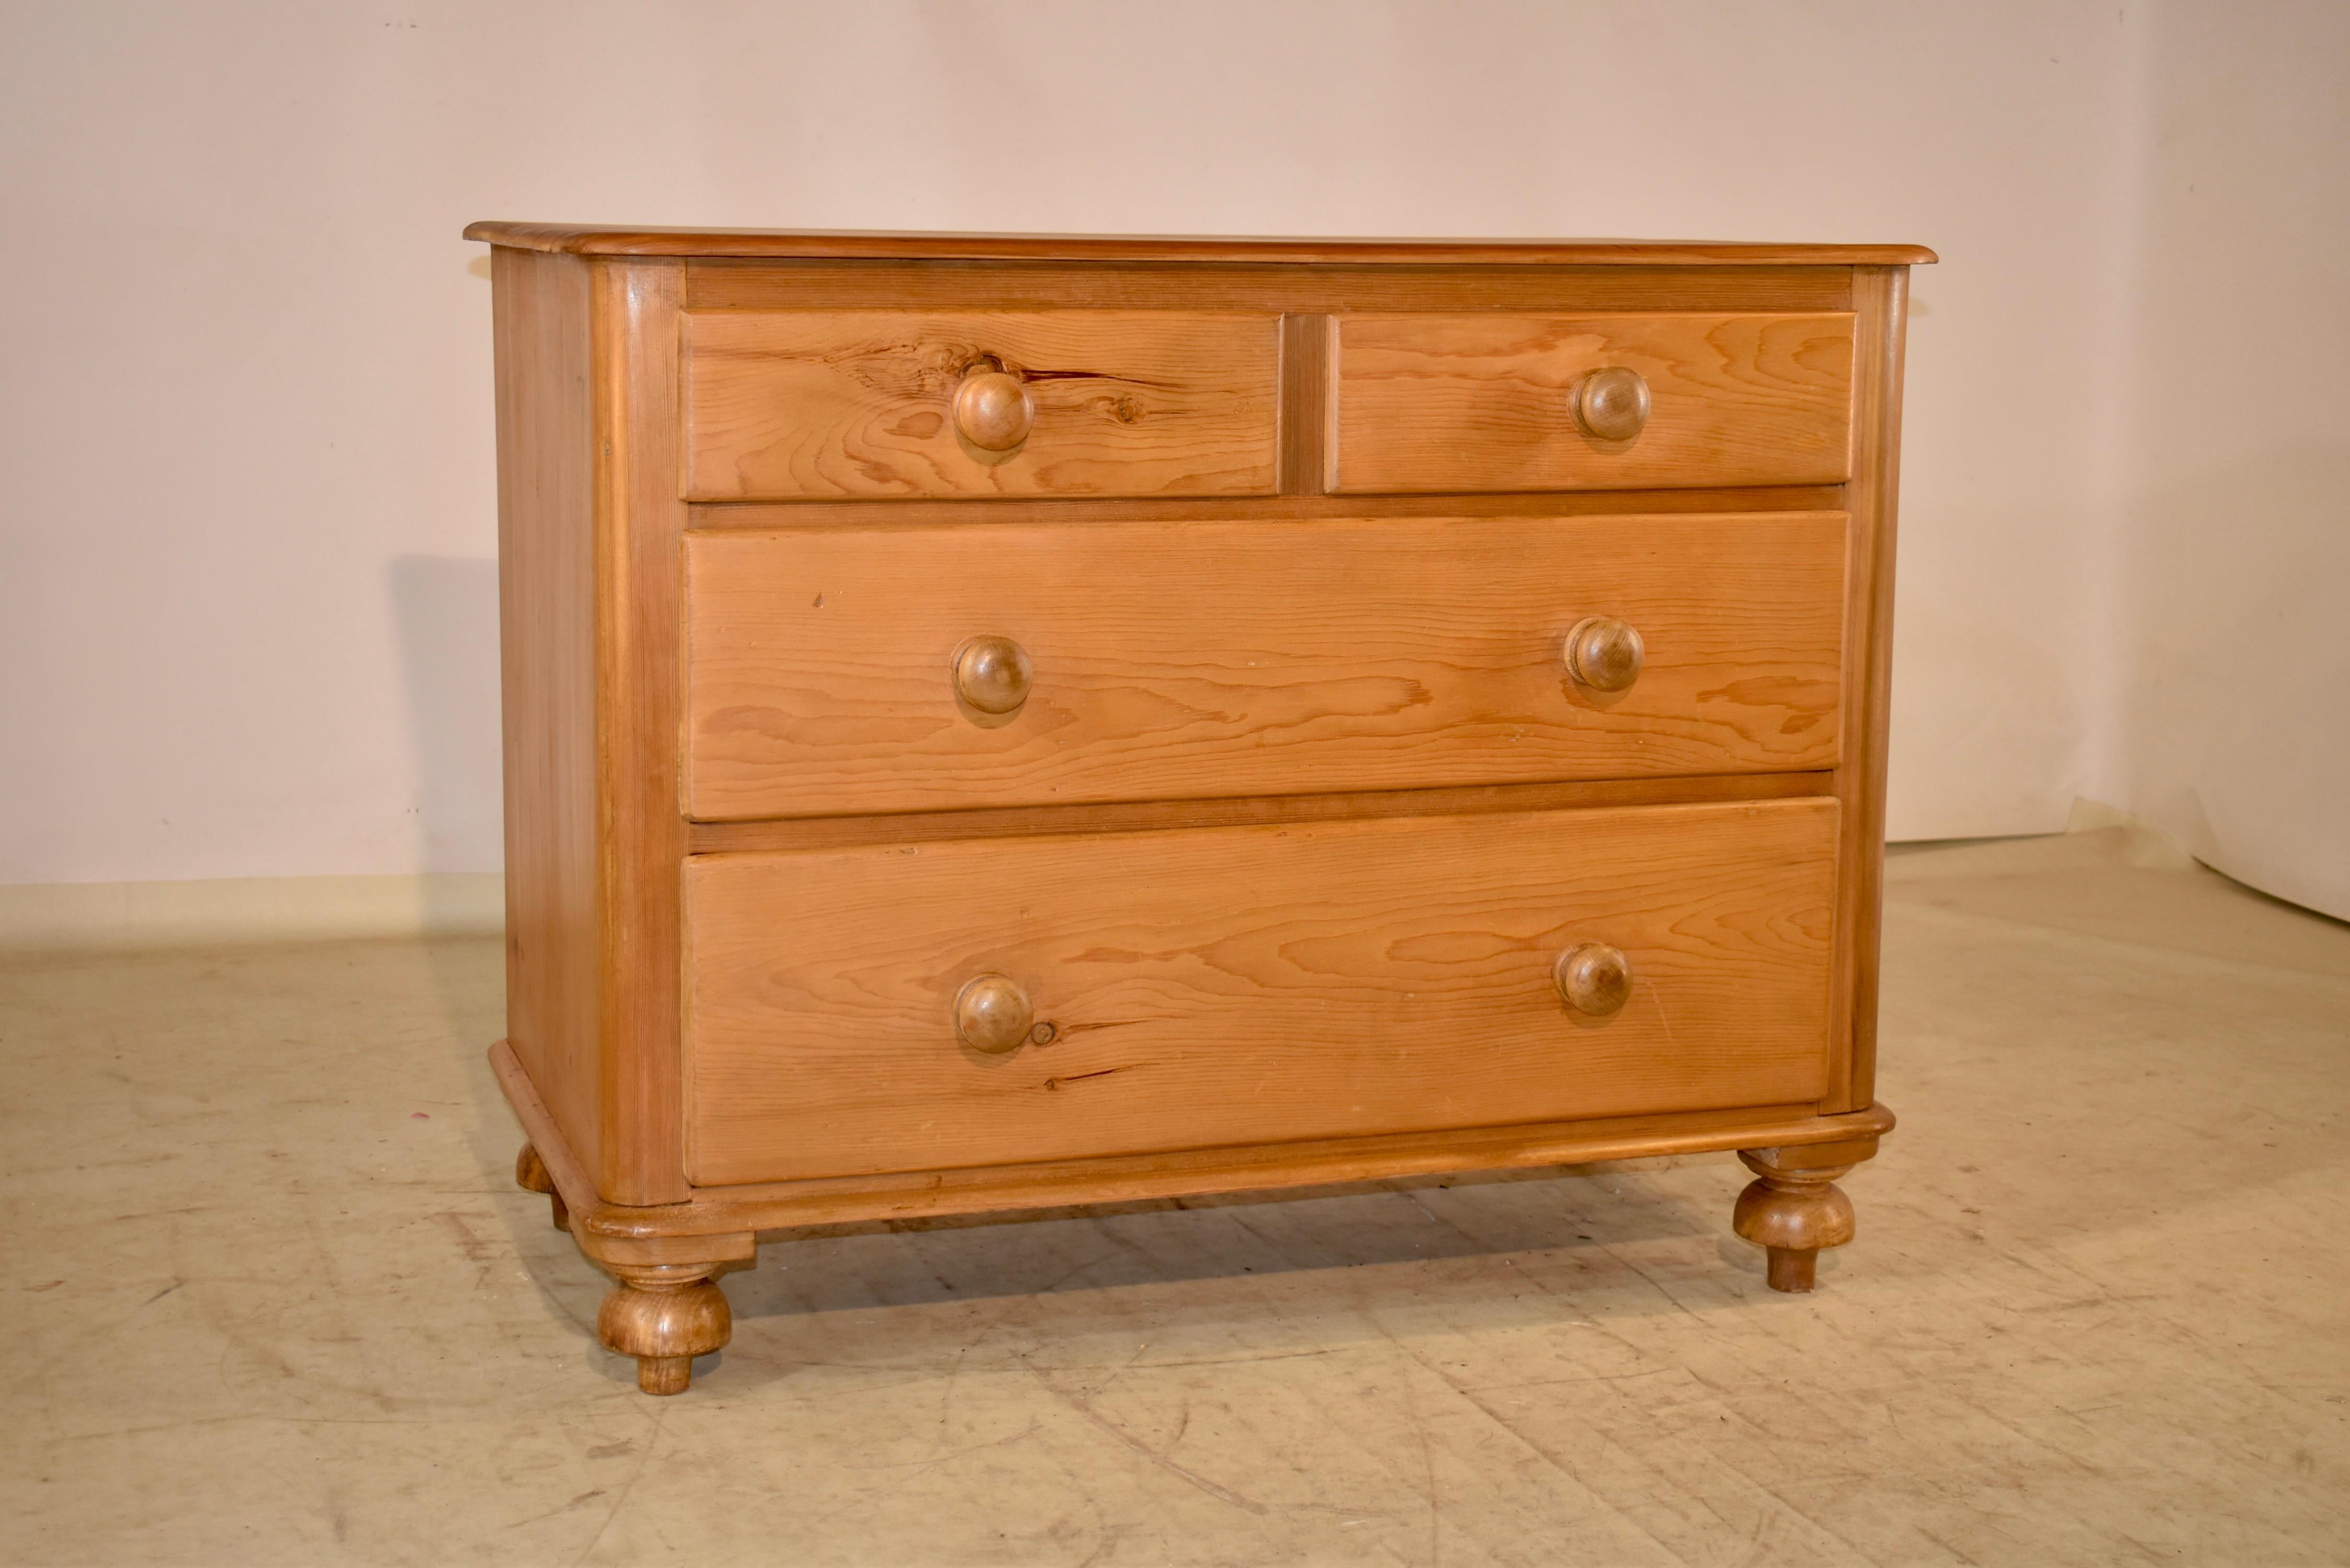 19th century pine chest of drawers from England. The top is made from two boards, and follows down to simple sides. The case has two smaller drawers over two larger drawers and has a molded base. The piece is supported on hand turned feet.